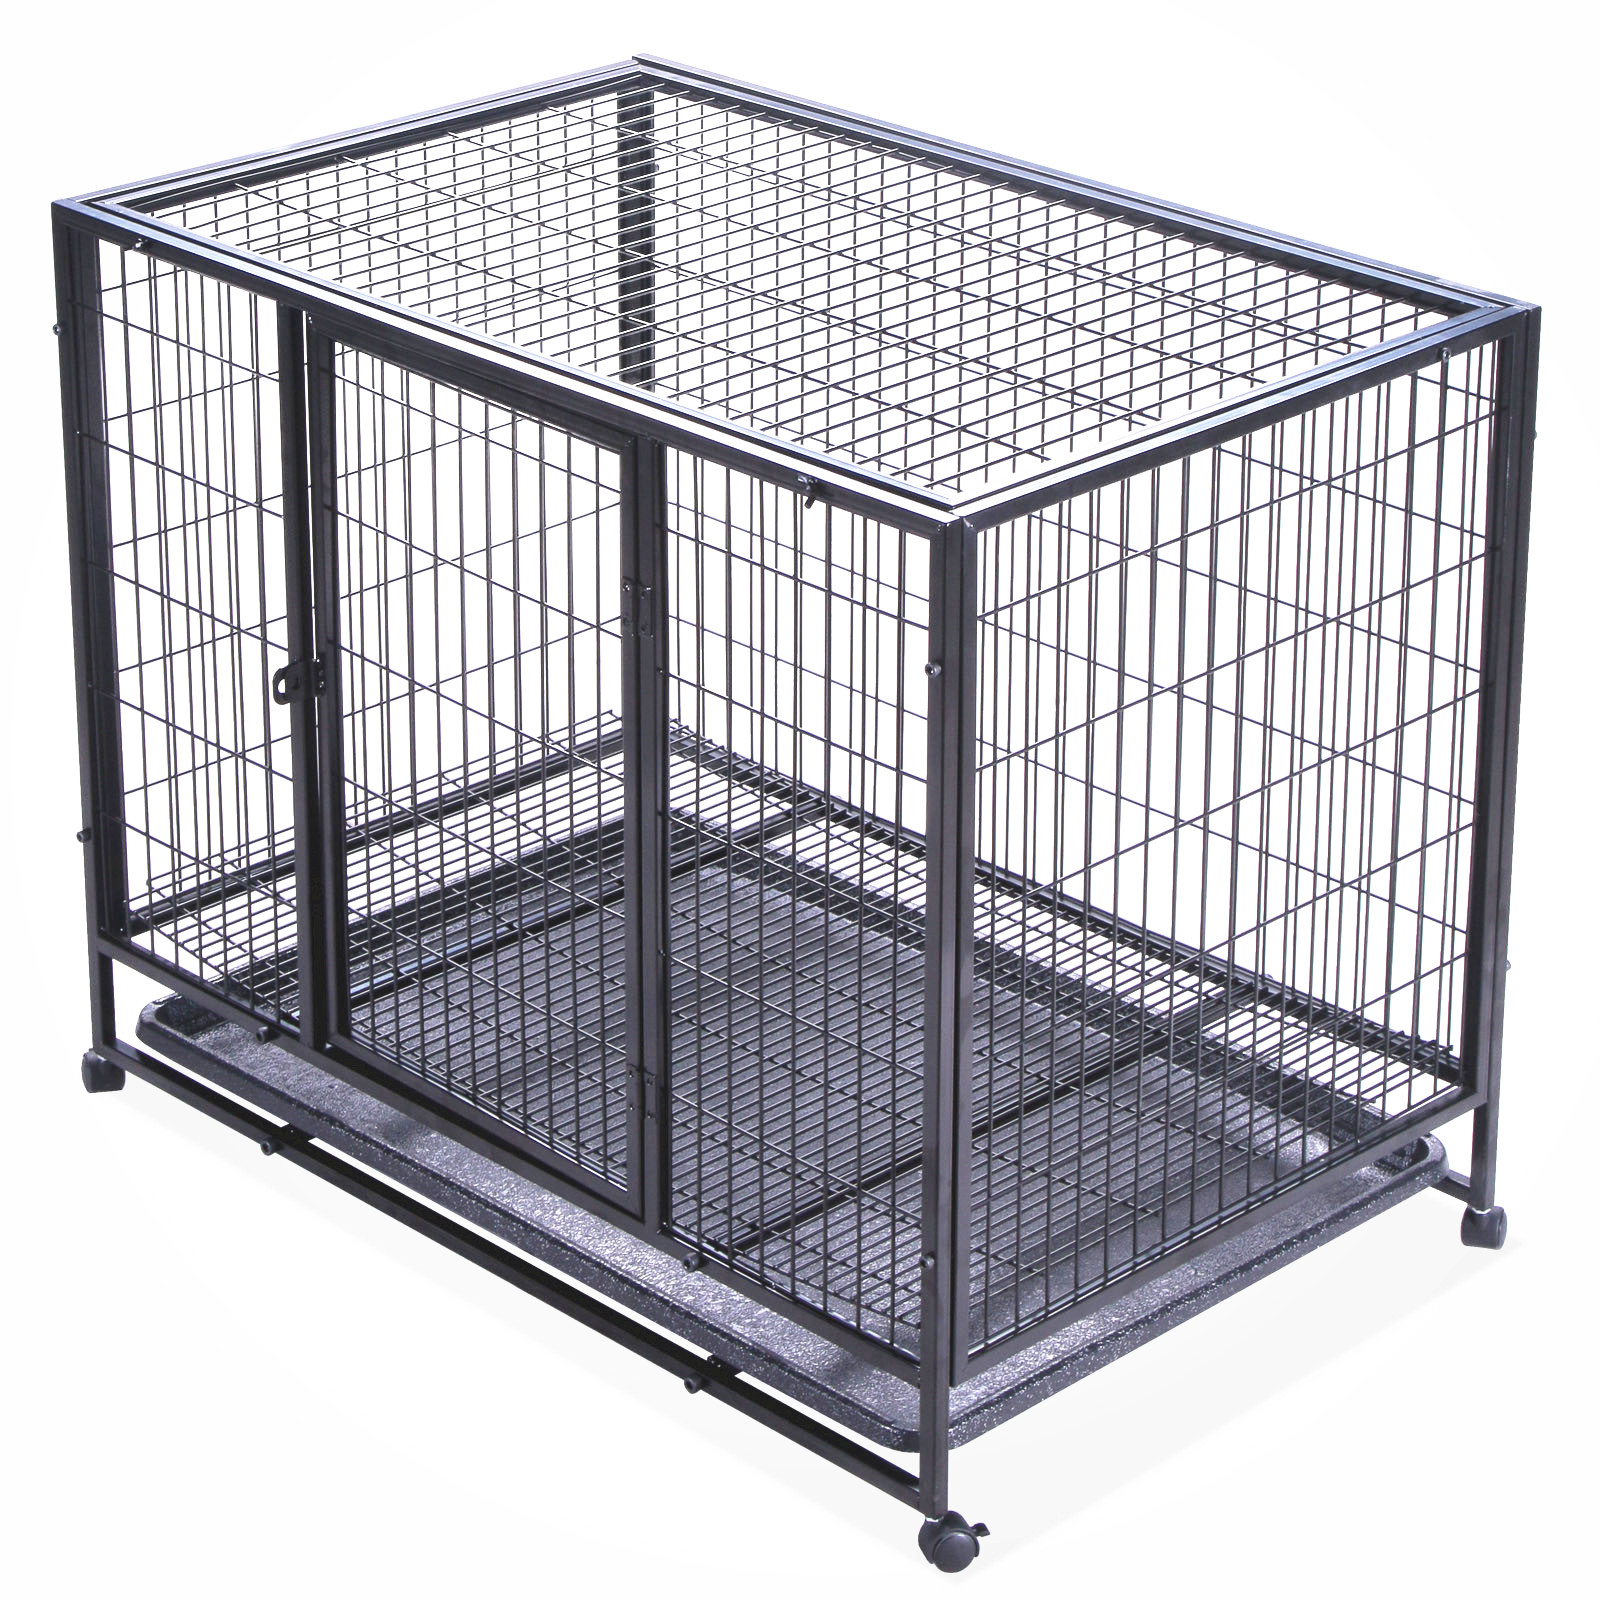 In Stock Stainless Steel Metal kennel Mesh commercial dog cage